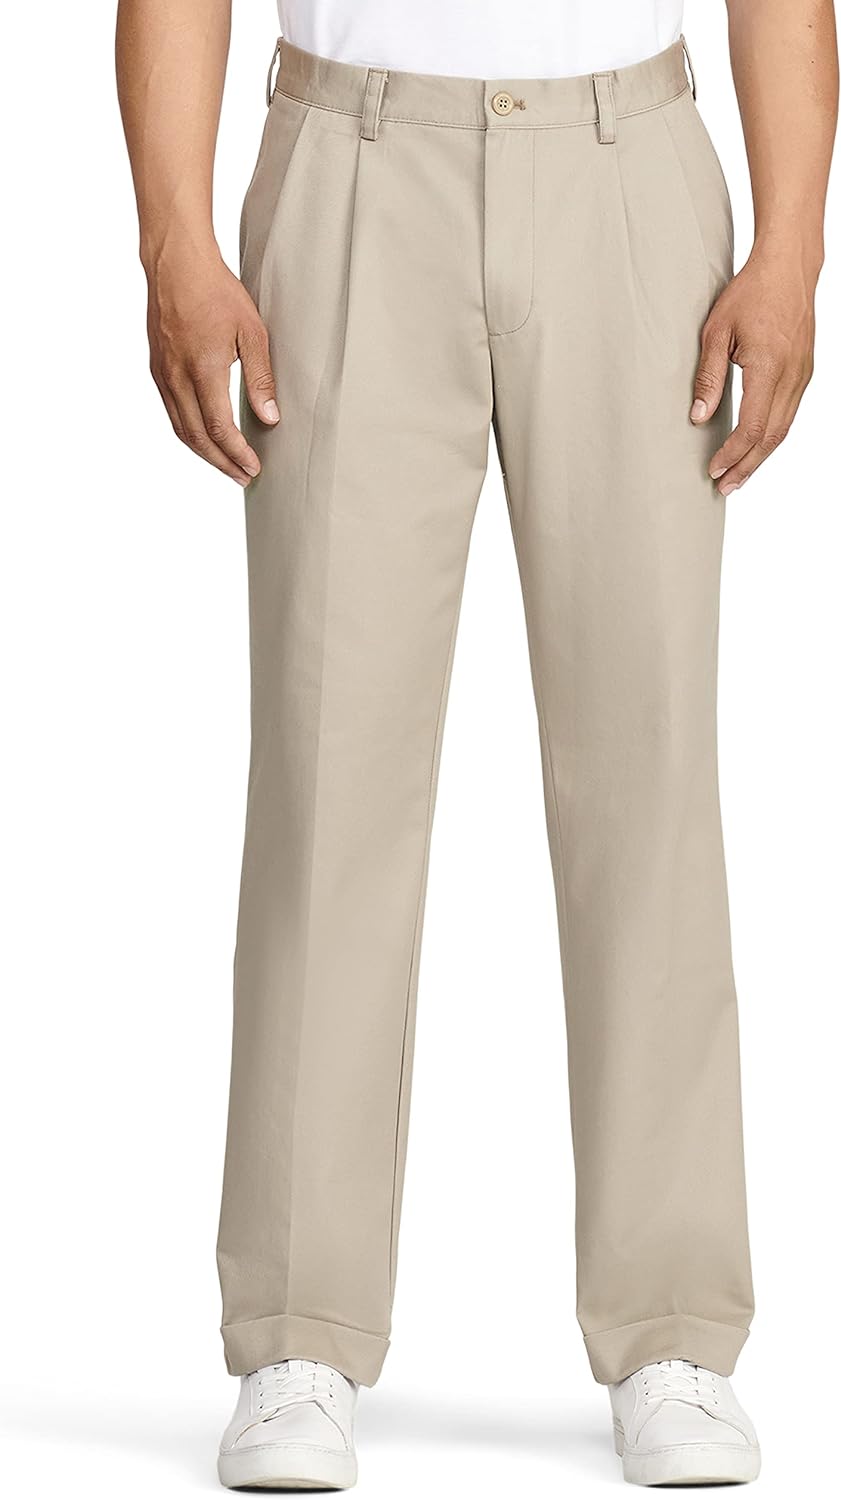 IZOD Men's American Chino Double Pleated Classic Fit Pant